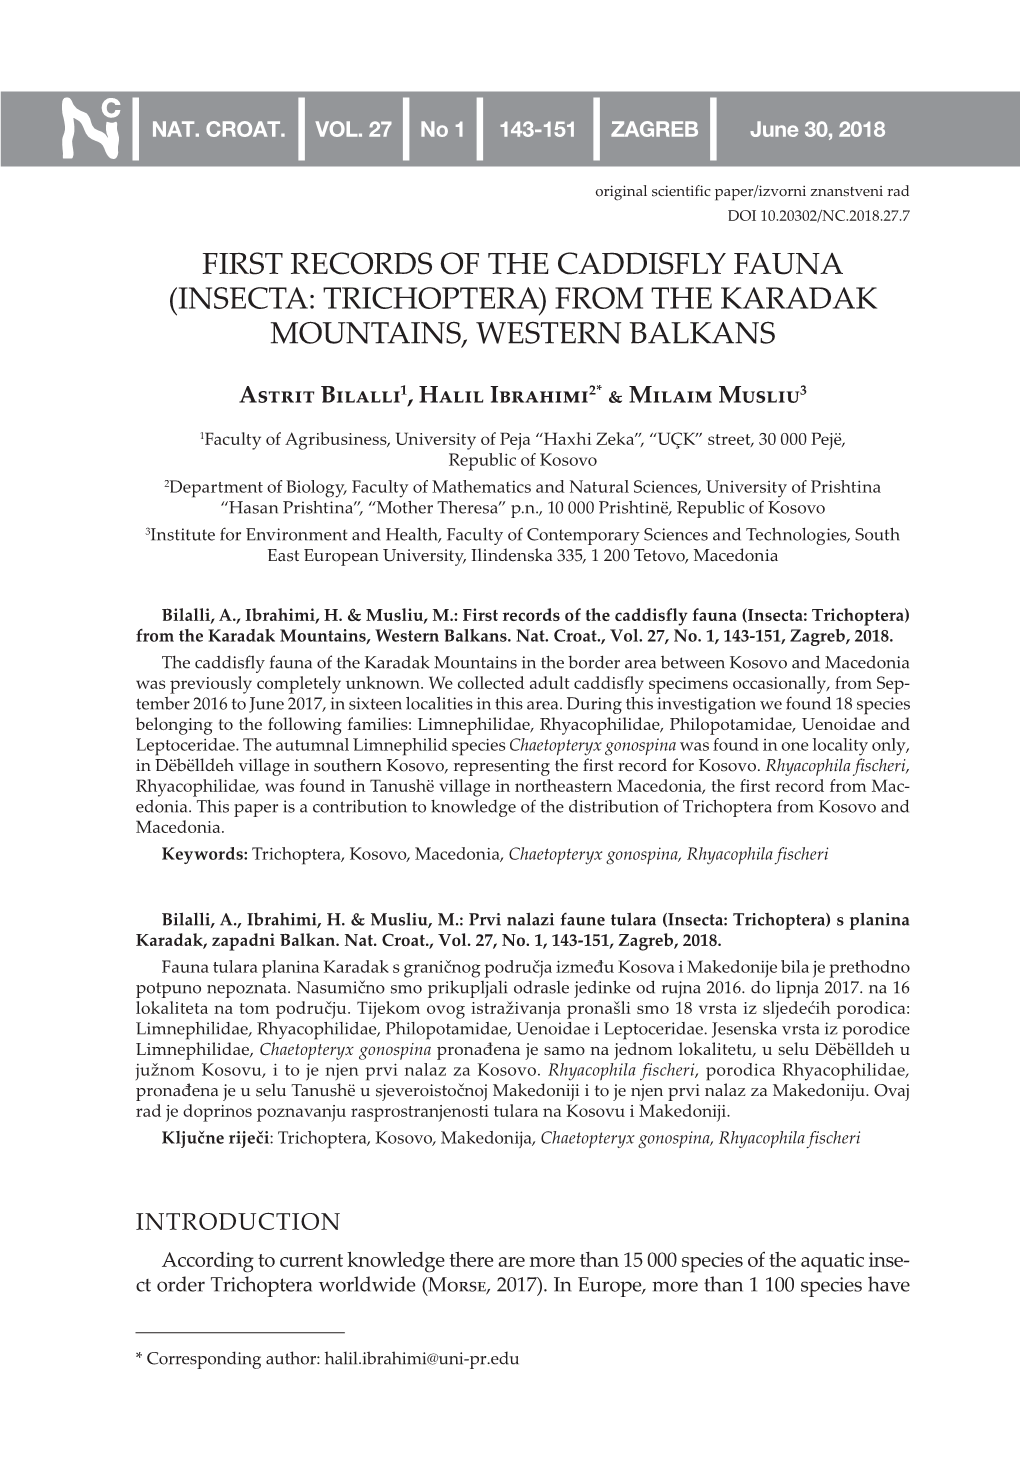 First Records of the Caddisfly Fauna (Insecta: Trichoptera) from the Karadak Mountains, Western Balkans